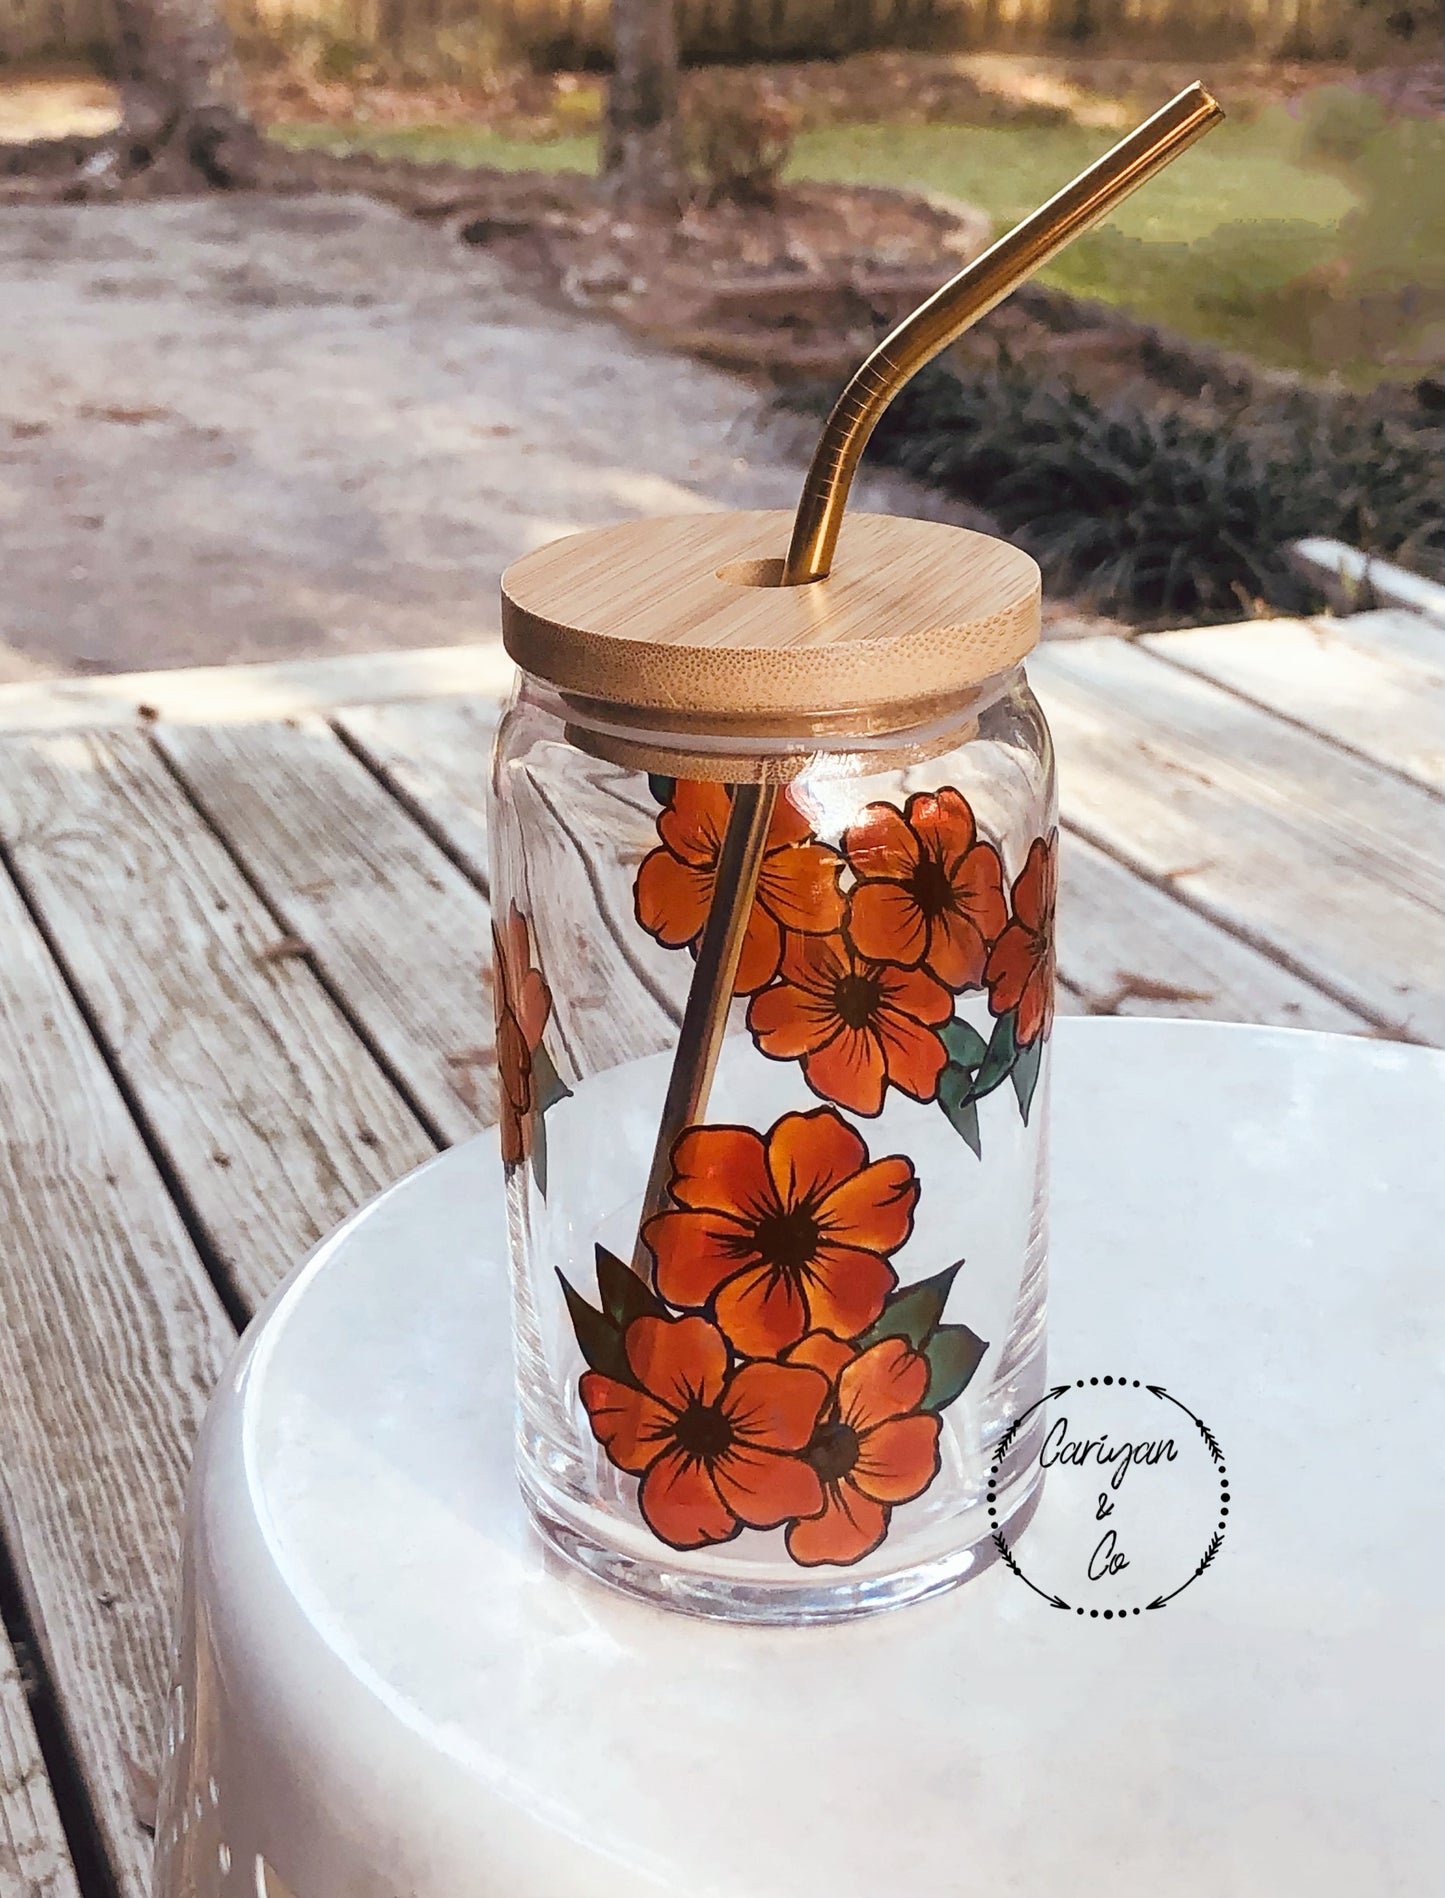 Iced Coffee Cup, Glass Cup, Travel Mug Cup, Hand Painted Glasses